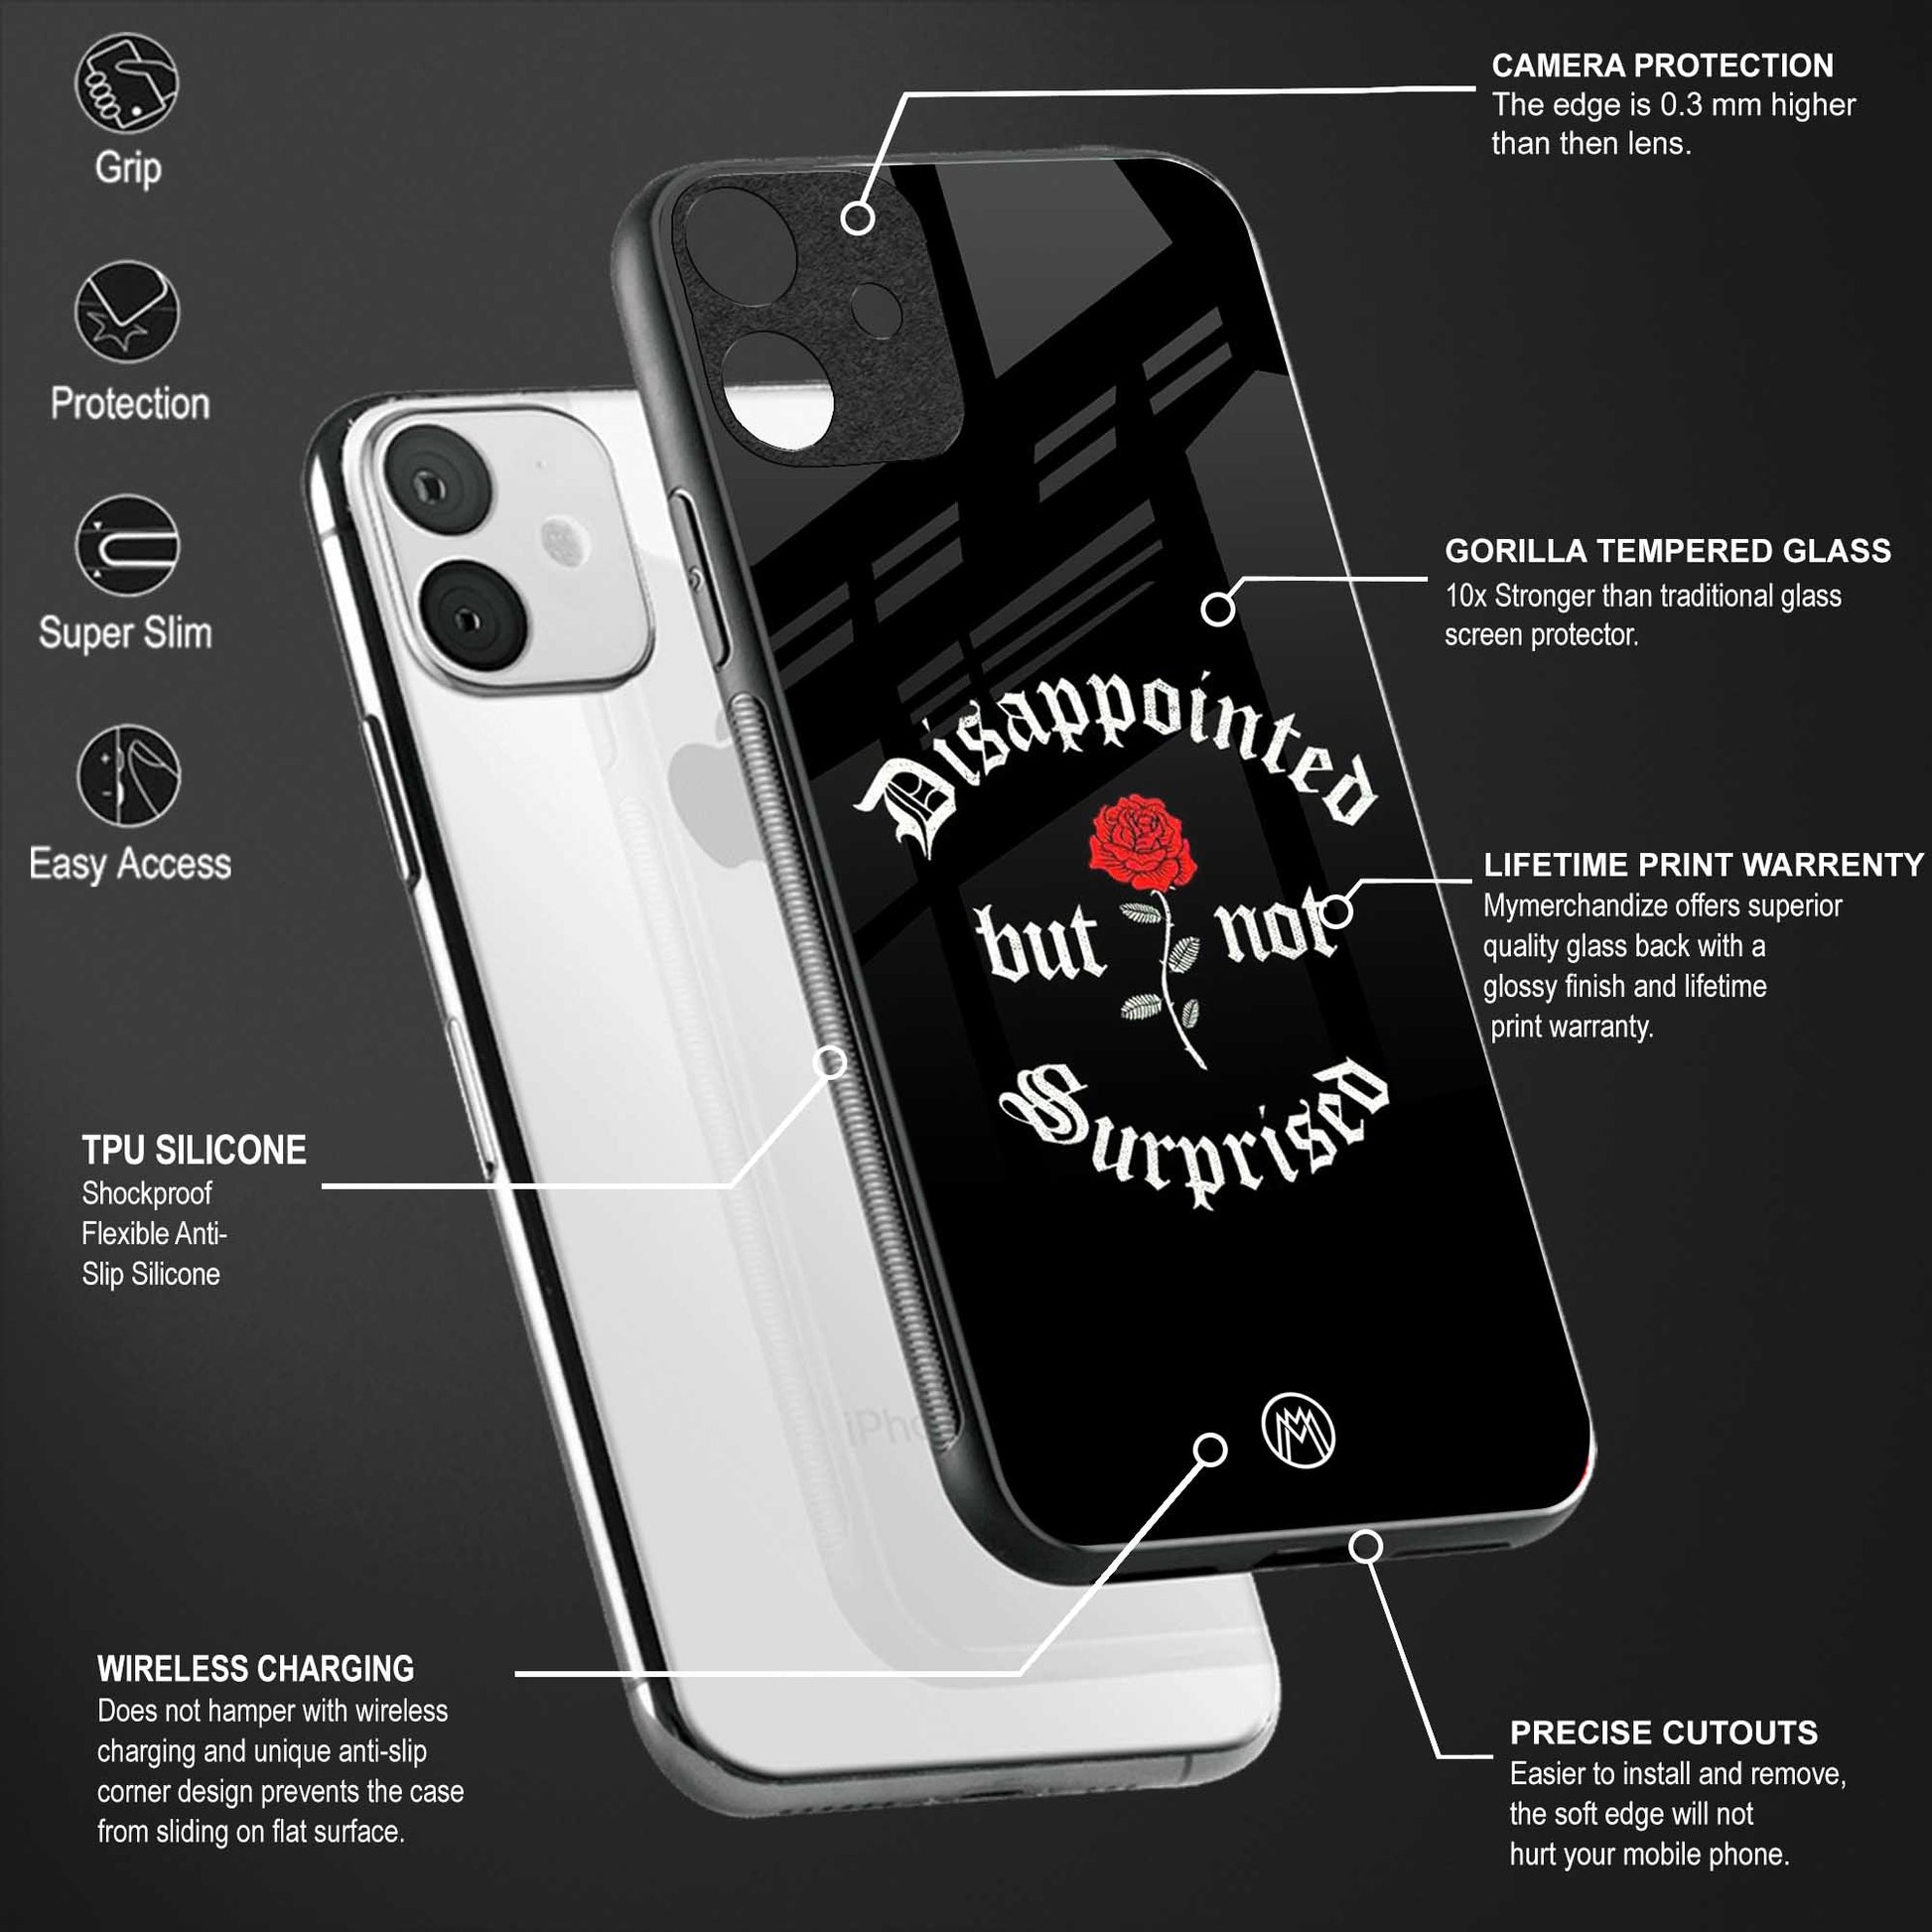 disappointed but not surprised back phone cover | glass case for vivo v25-5g